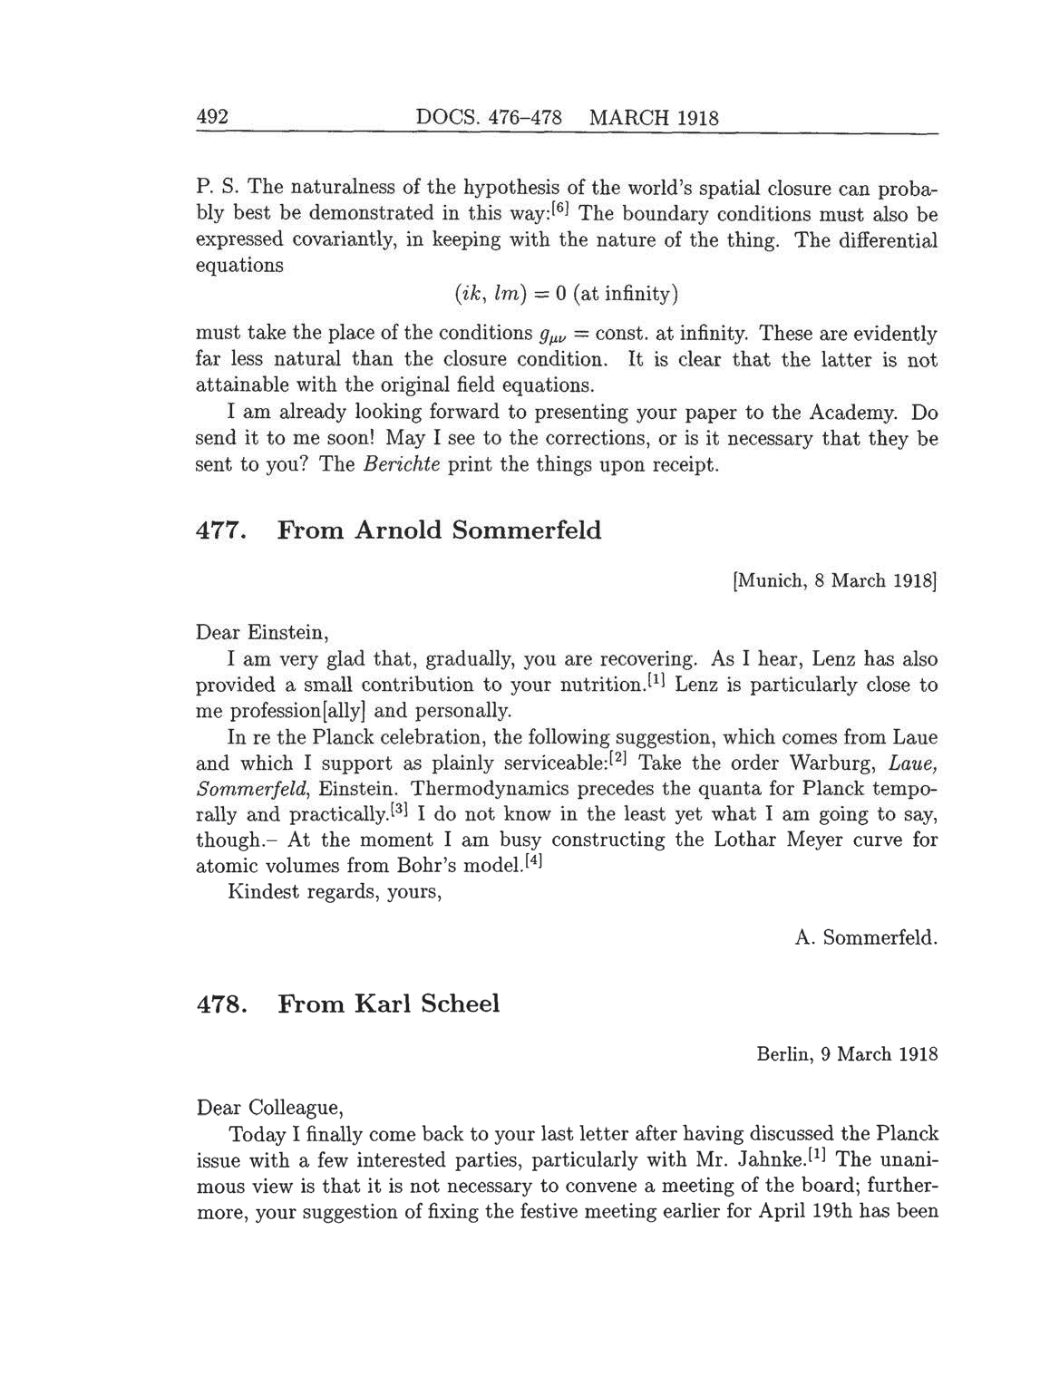 Volume 8: The Berlin Years: Correspondence, 1914-1918 (English translation supplement) page 492